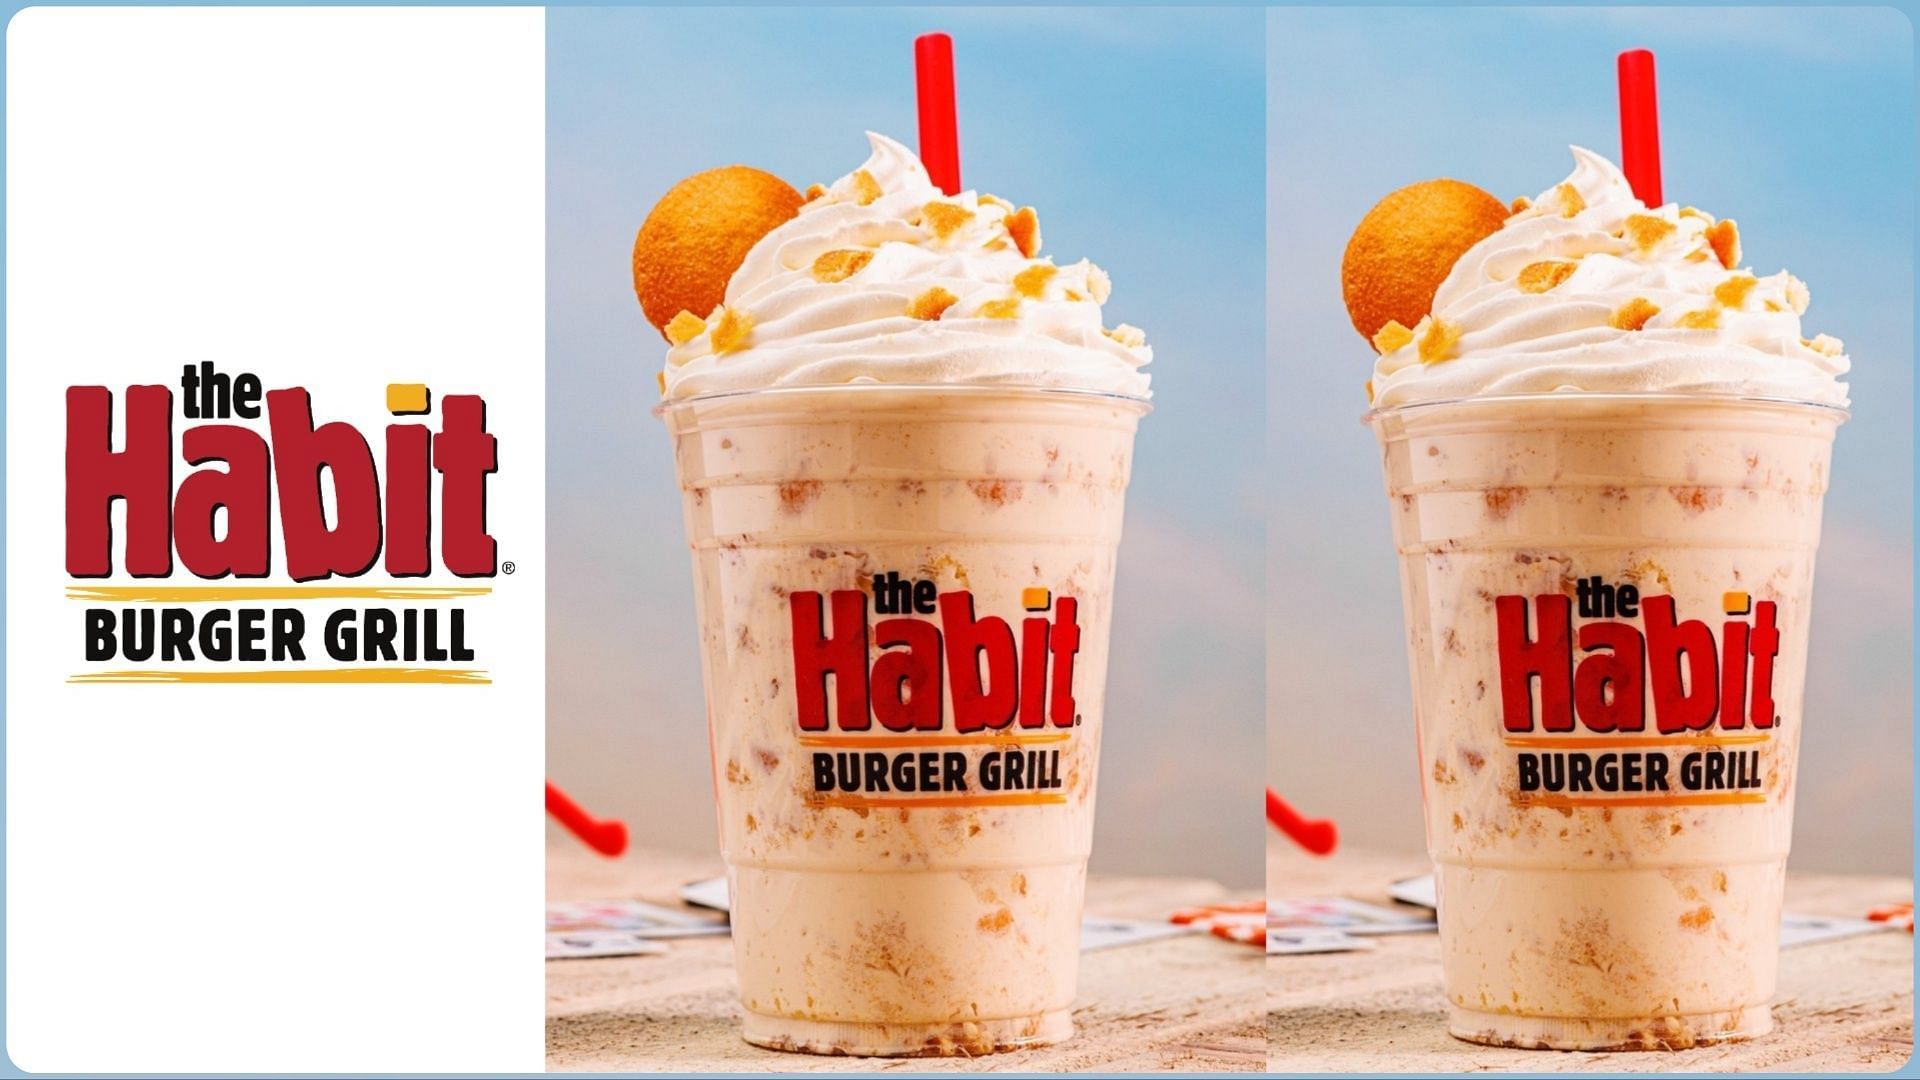 The Habit Burger Grill introduces a new Banana Wafer Shake to it